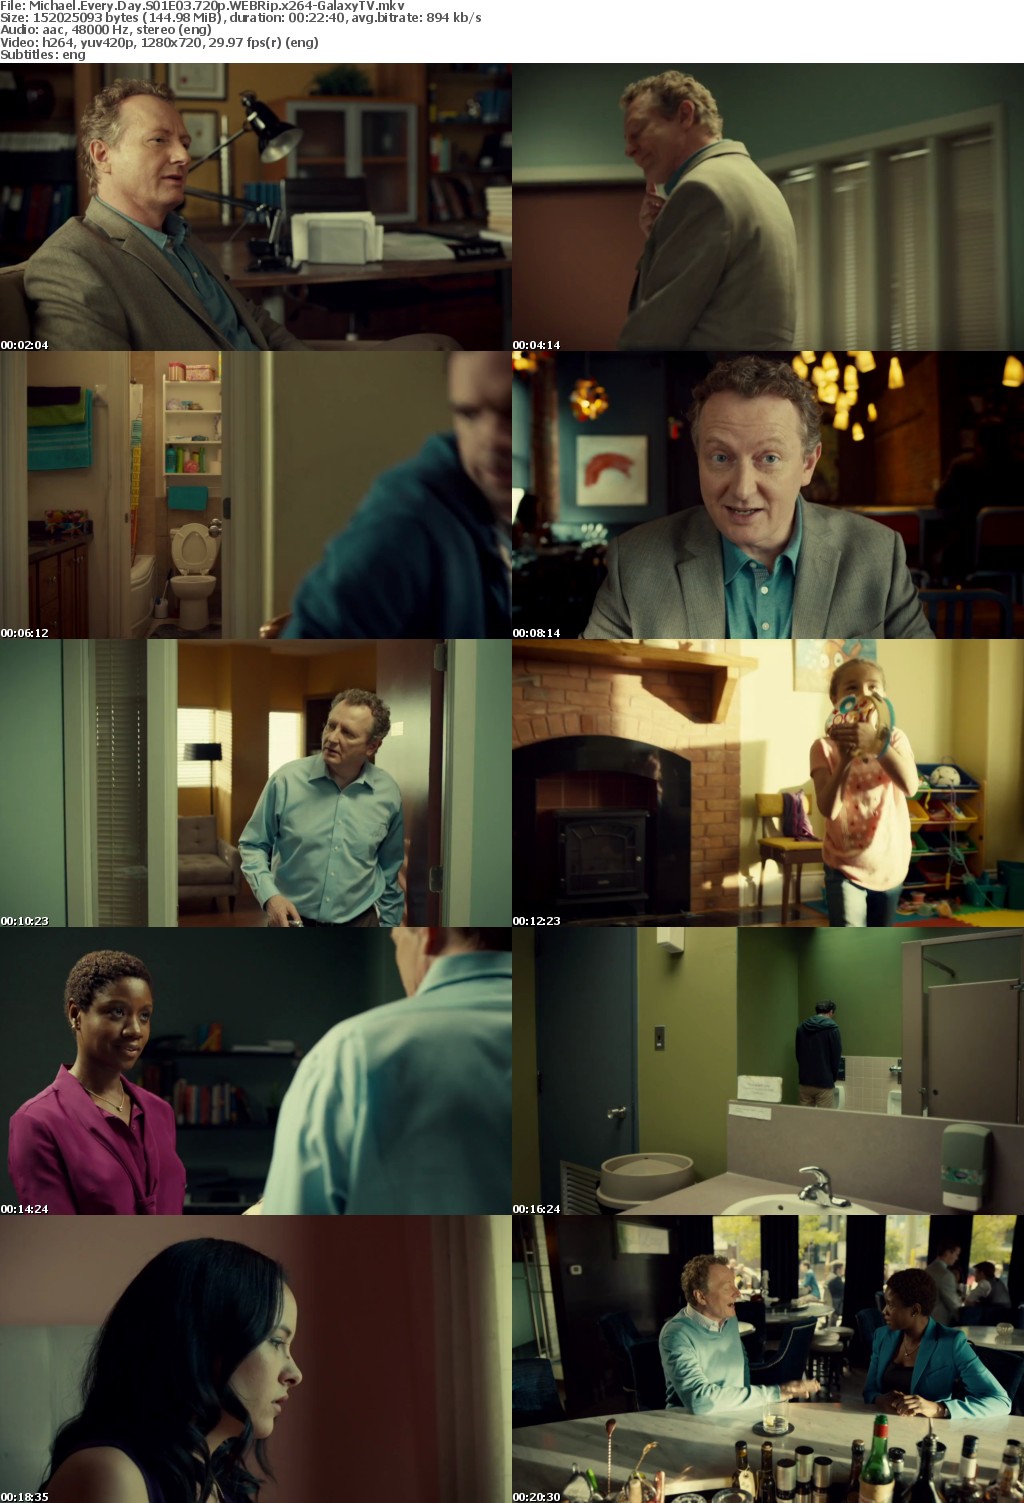 Michael Every Day S02 COMPLETE 720p WEBRip x264-GalaxyTV